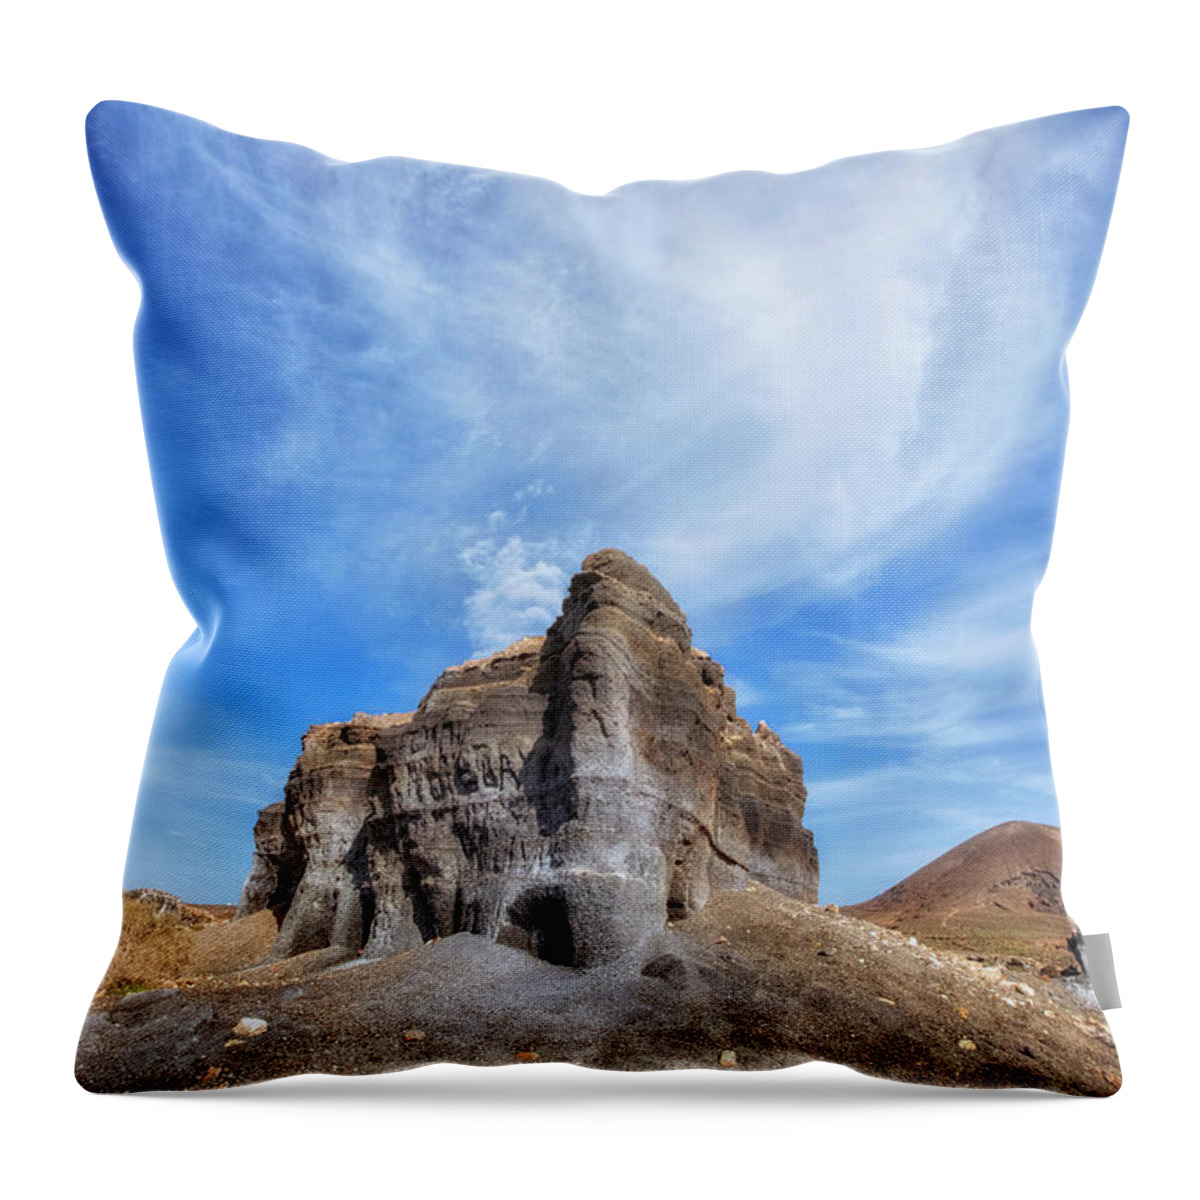 Erosion Of Volcanic Layers Throw Pillow featuring the photograph Teseguite - Lanzarote by Joana Kruse